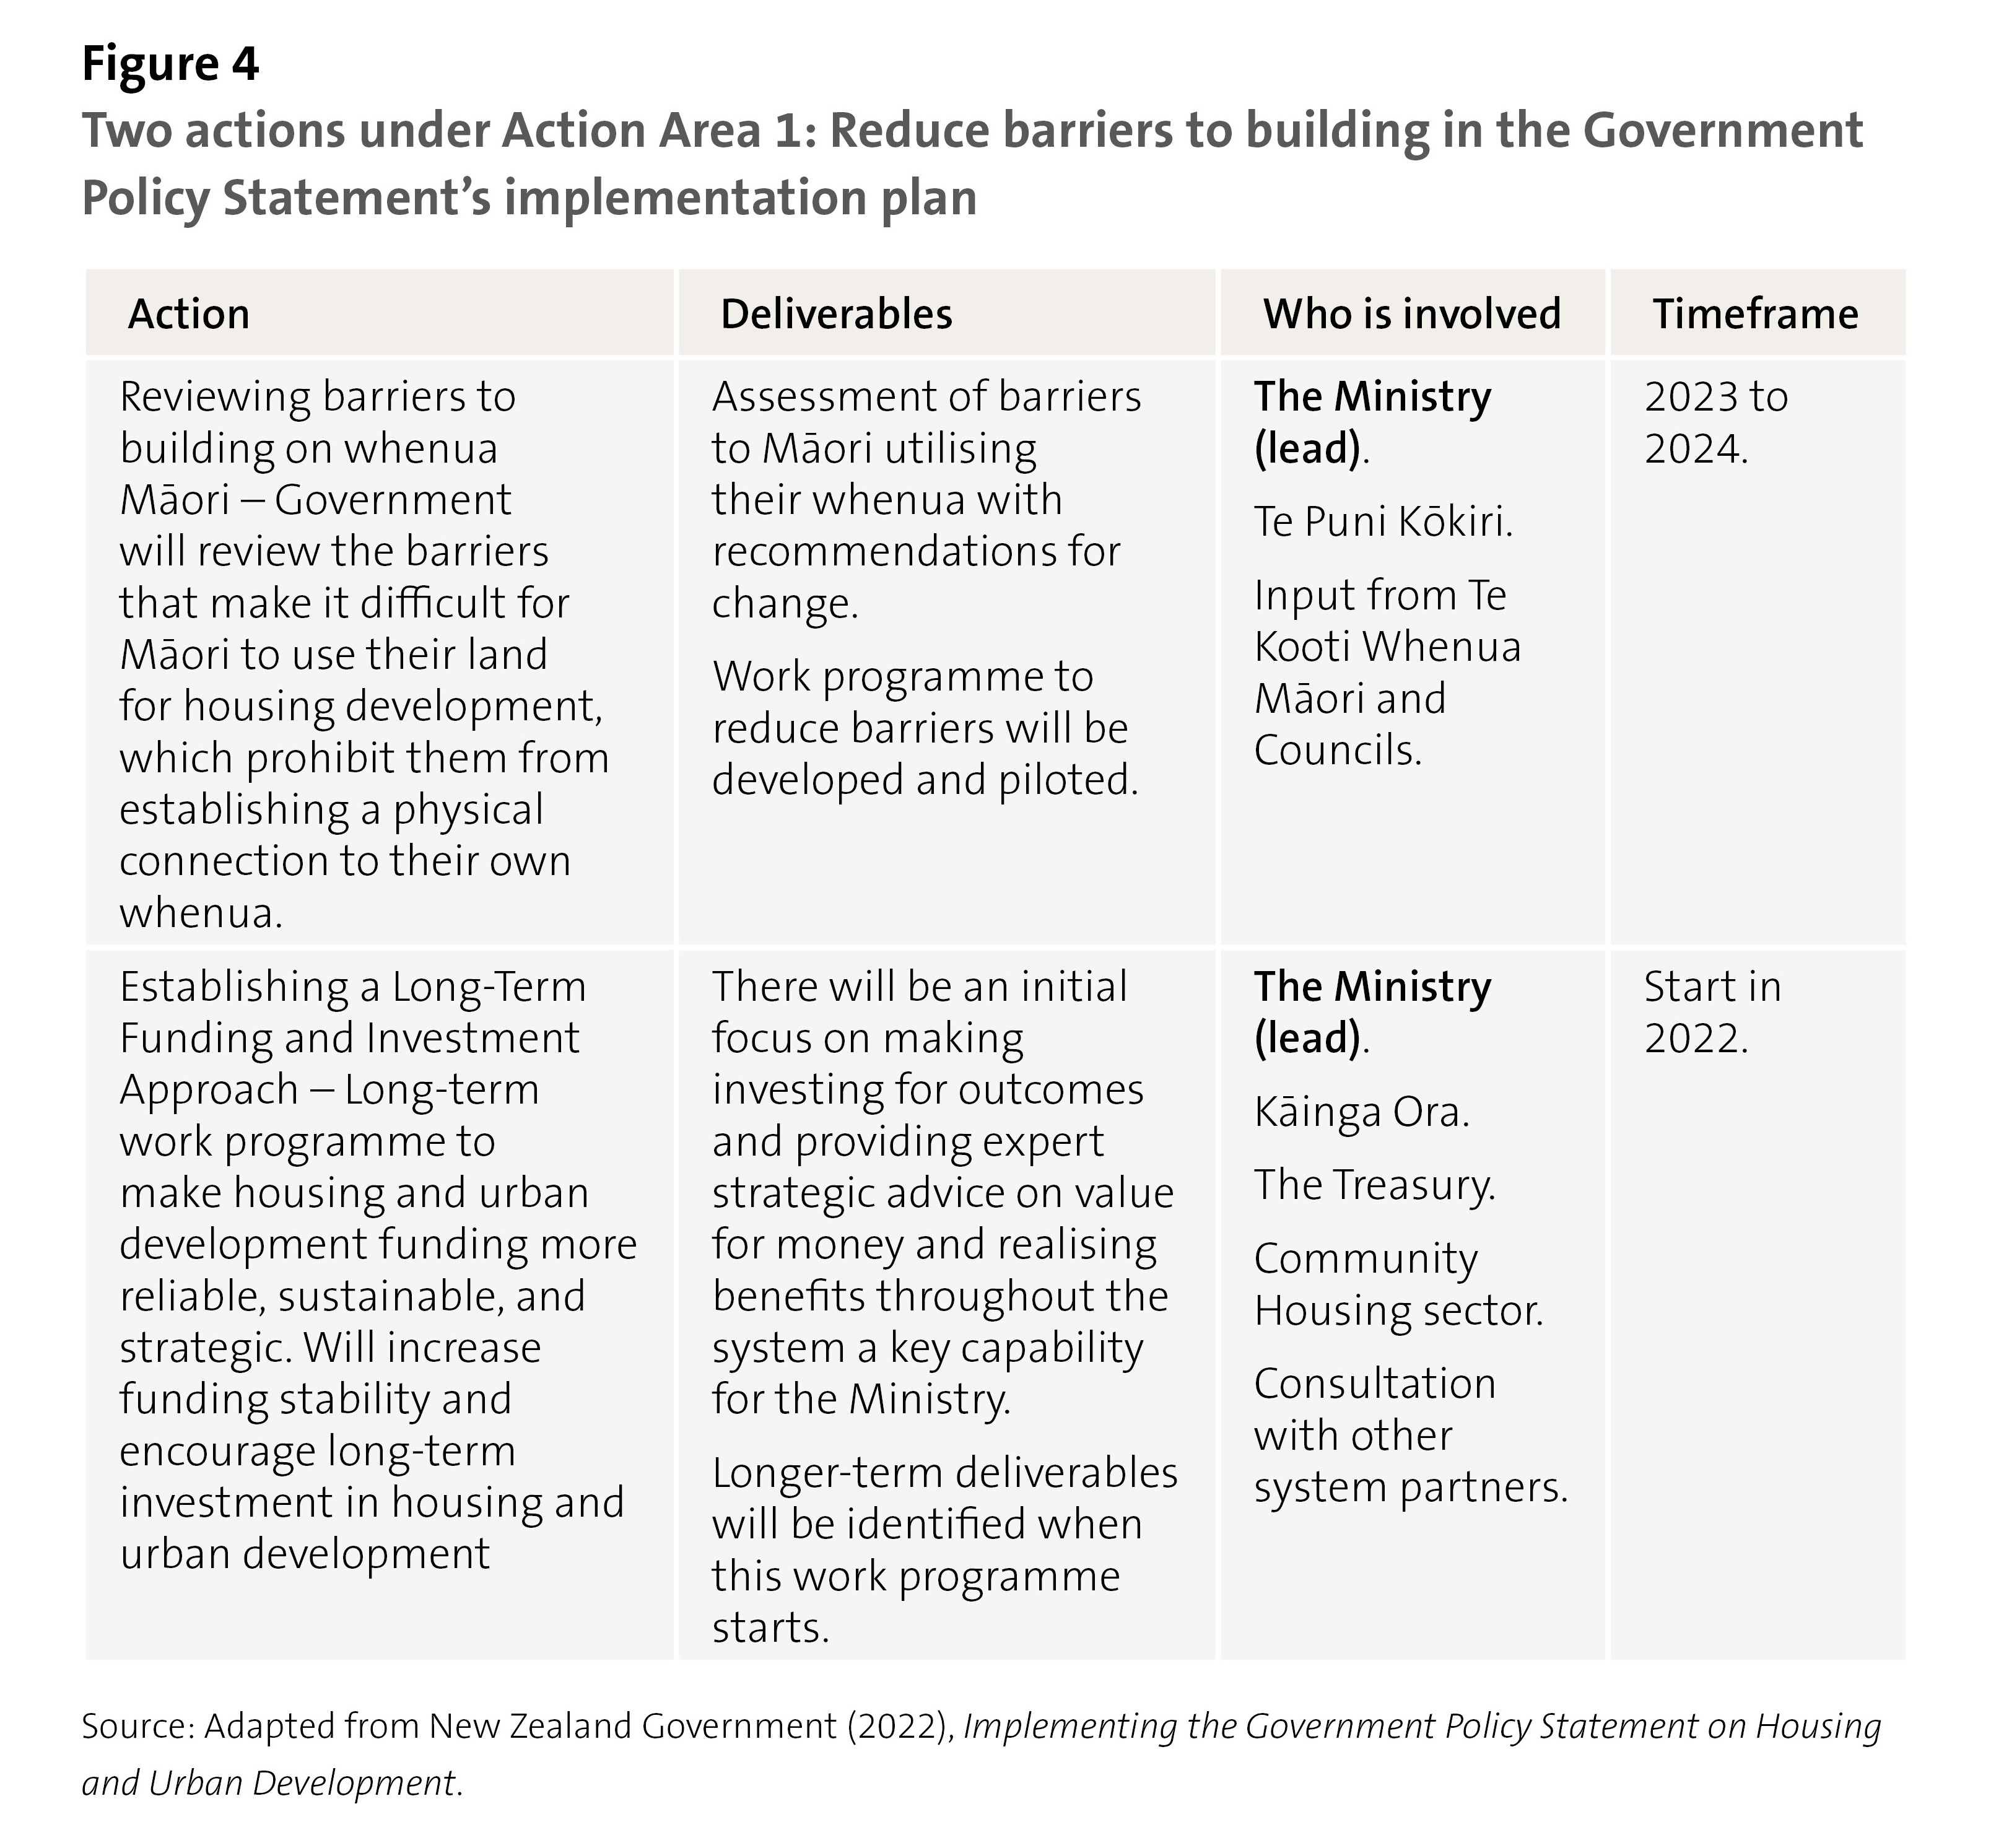 Figure 4: Two actions under Action Area 1: Reduce barriers to building in the Government Policy Statement's implementation plan